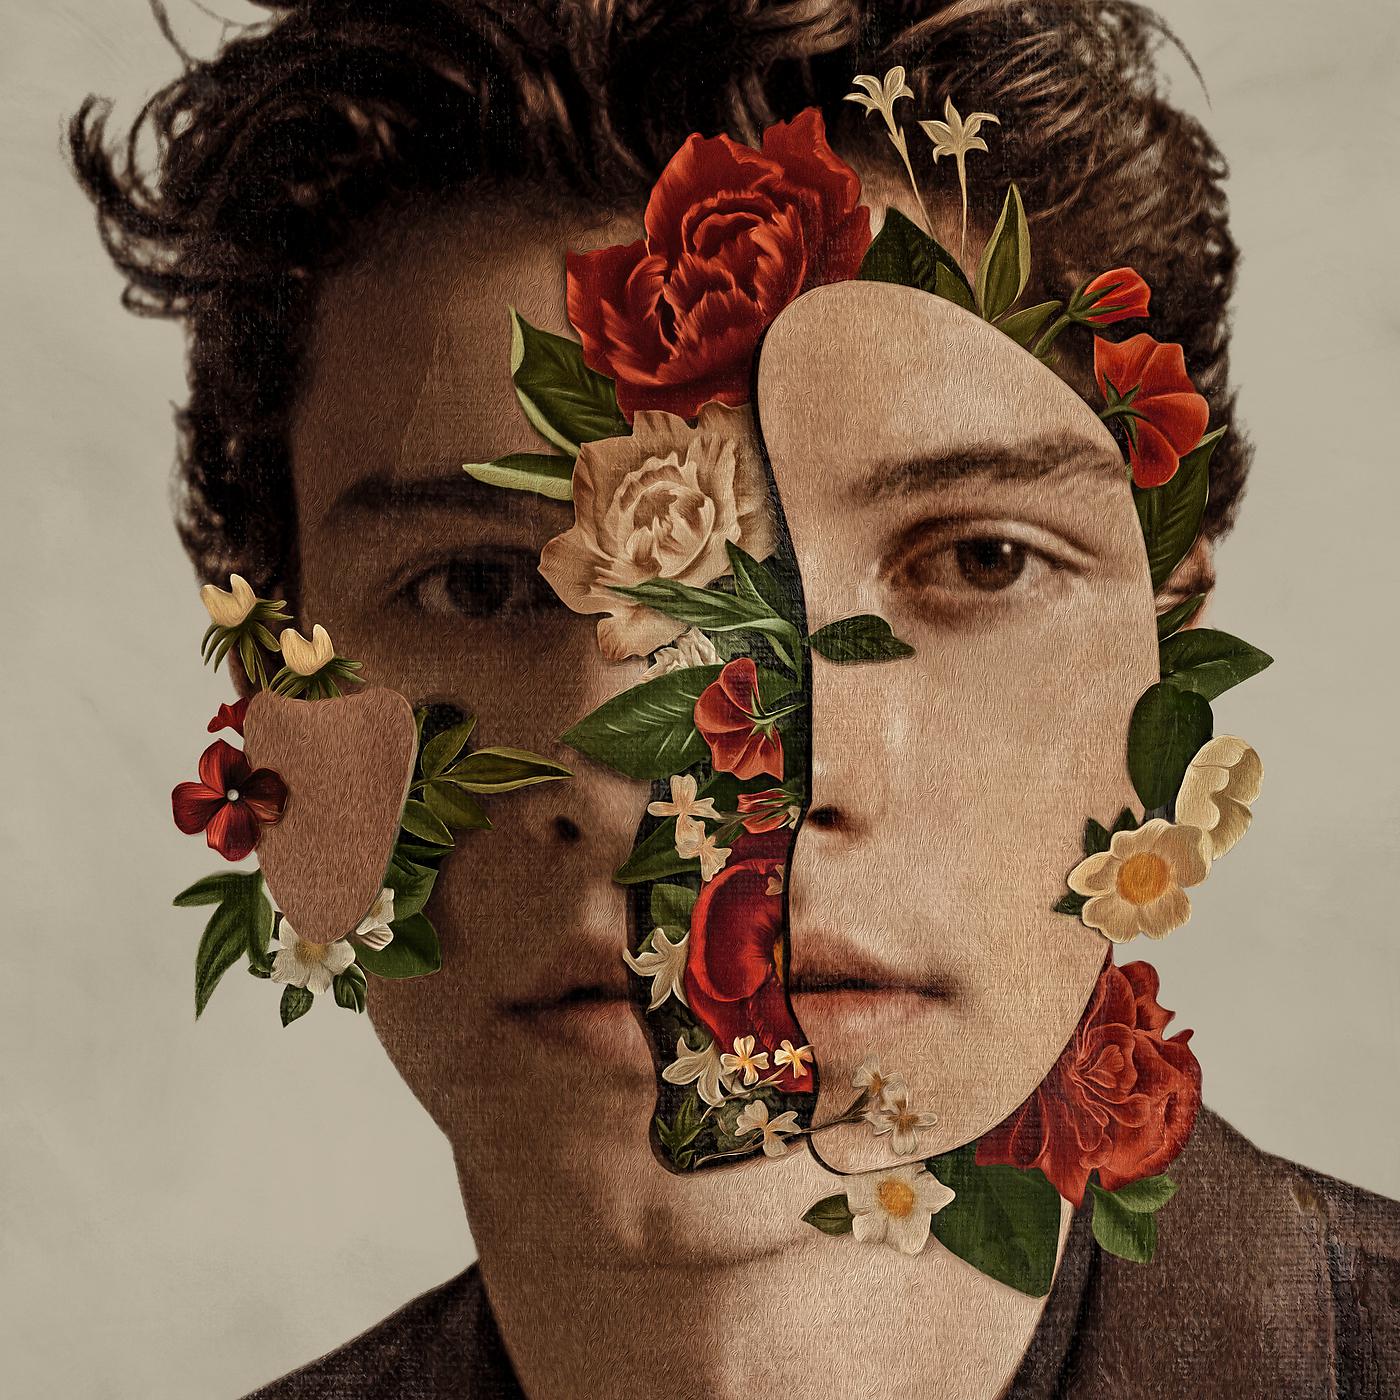 Shawn Mendes - Youth